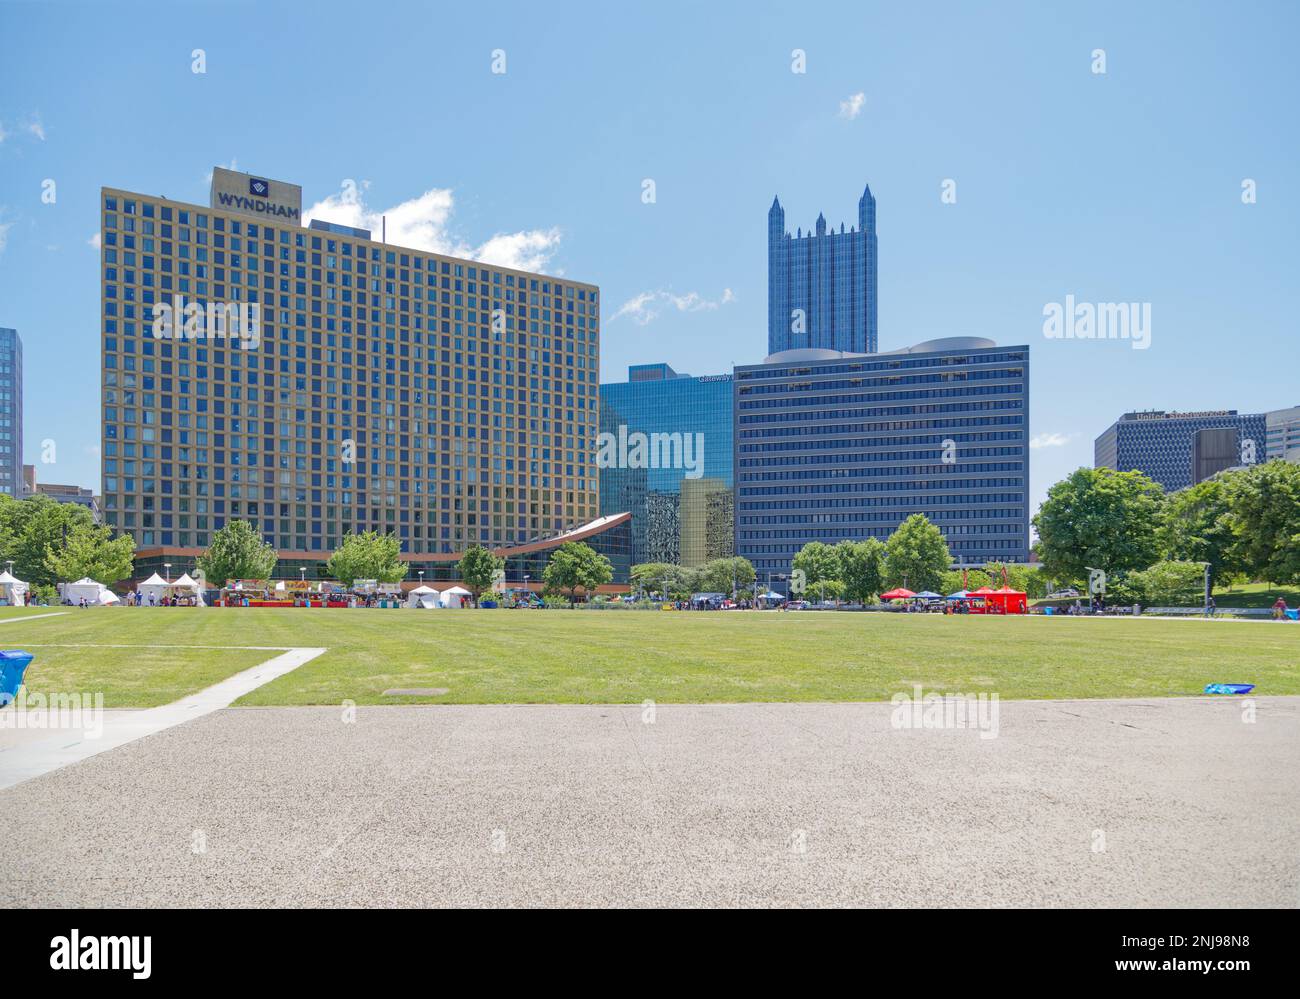 Vista dal Point state Park: Wyndham Grand Pittsburgh Downtown, RiverVue Apartments, United Steelworkers Building. Foto Stock